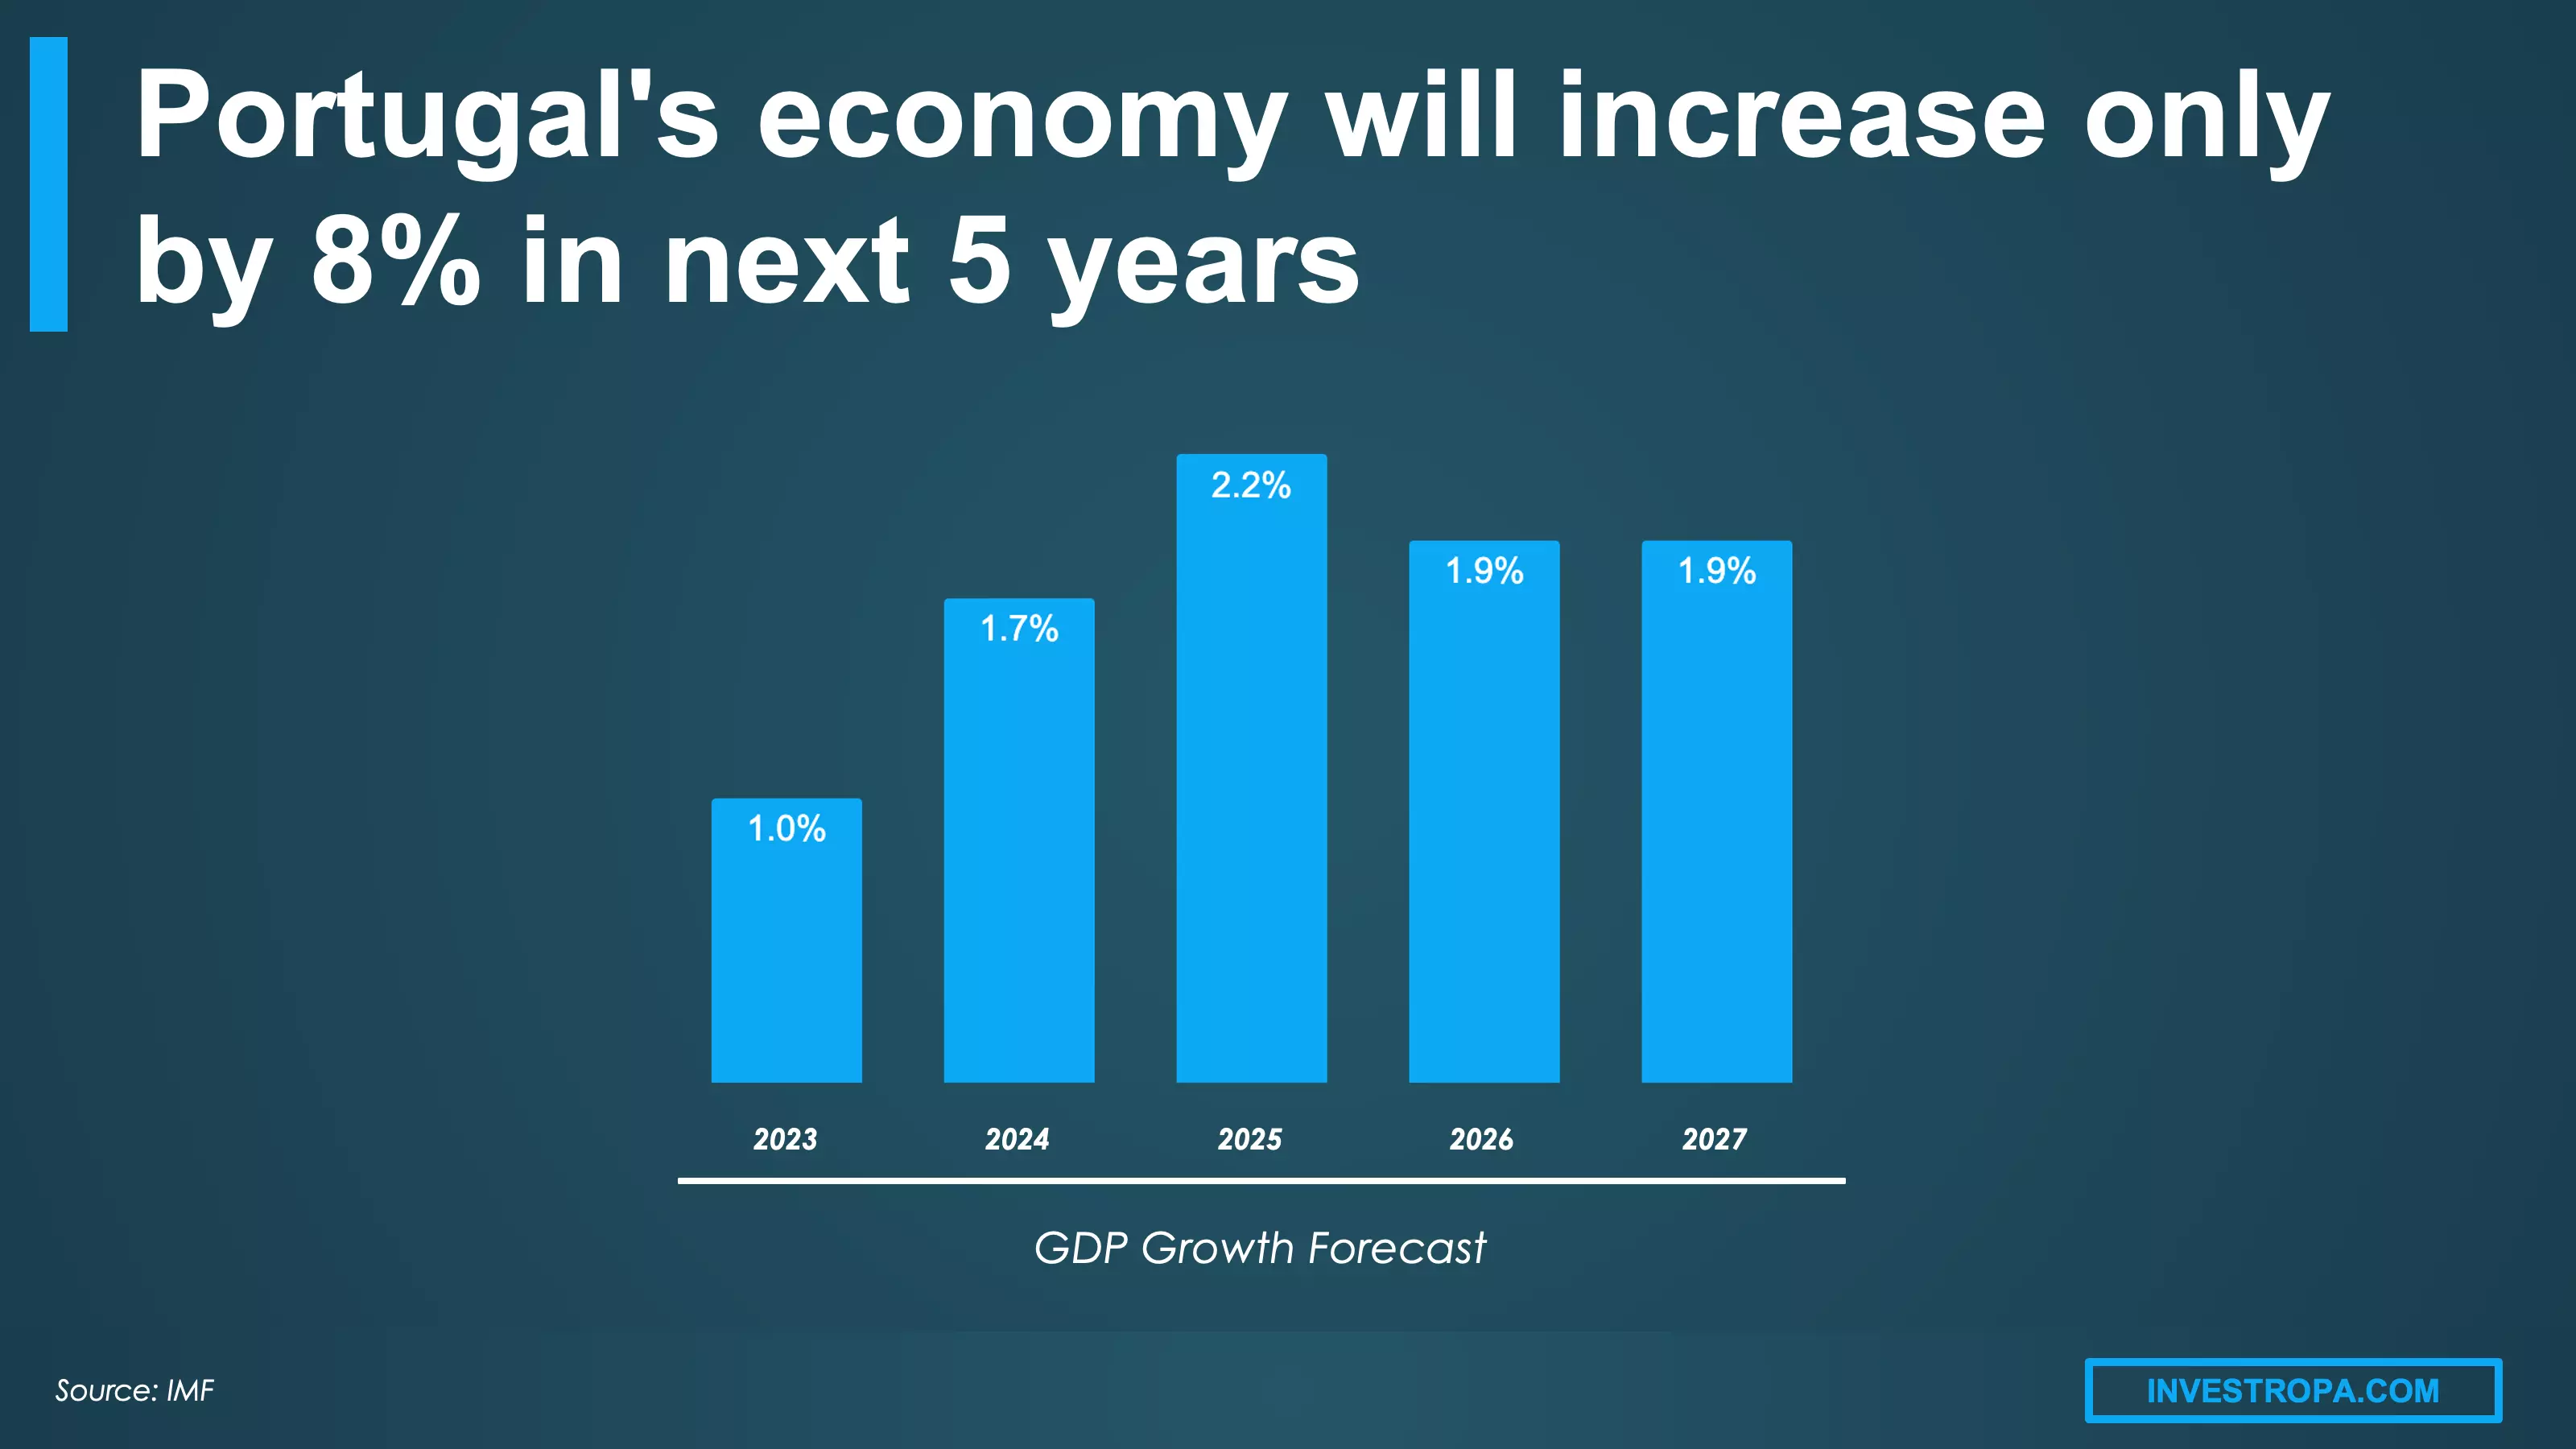 Portugal gdp growth